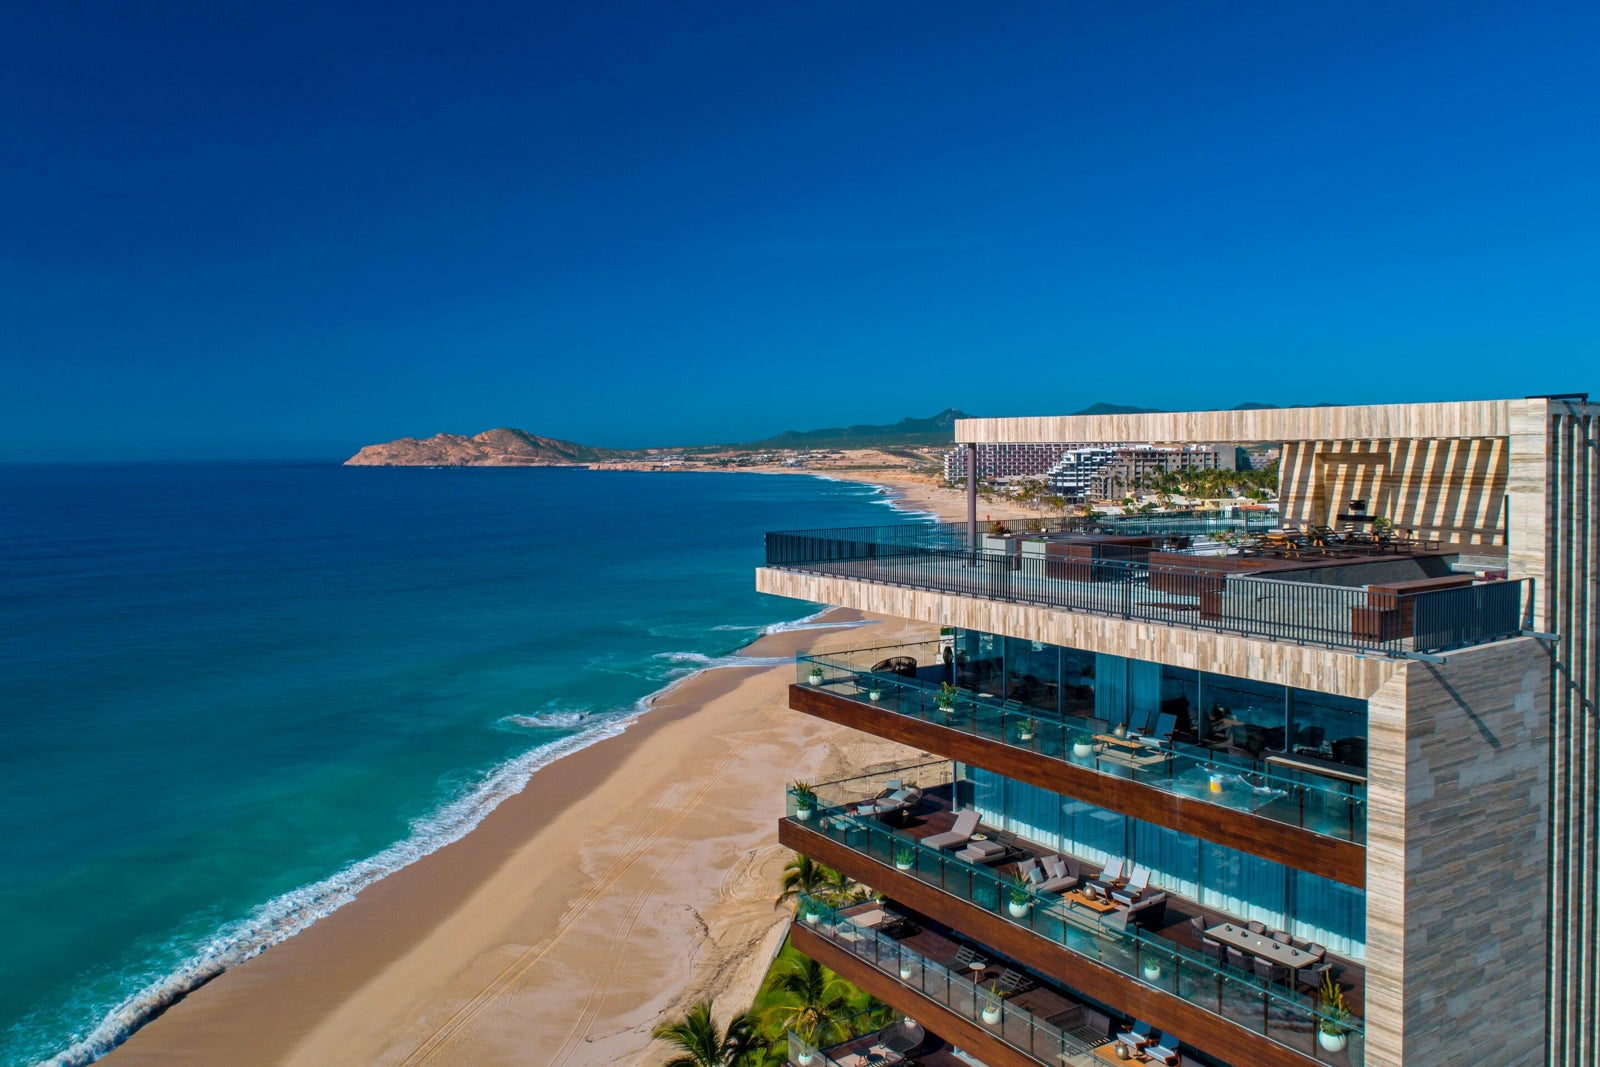 The Solaz, Luxury Collection hotel on the beach